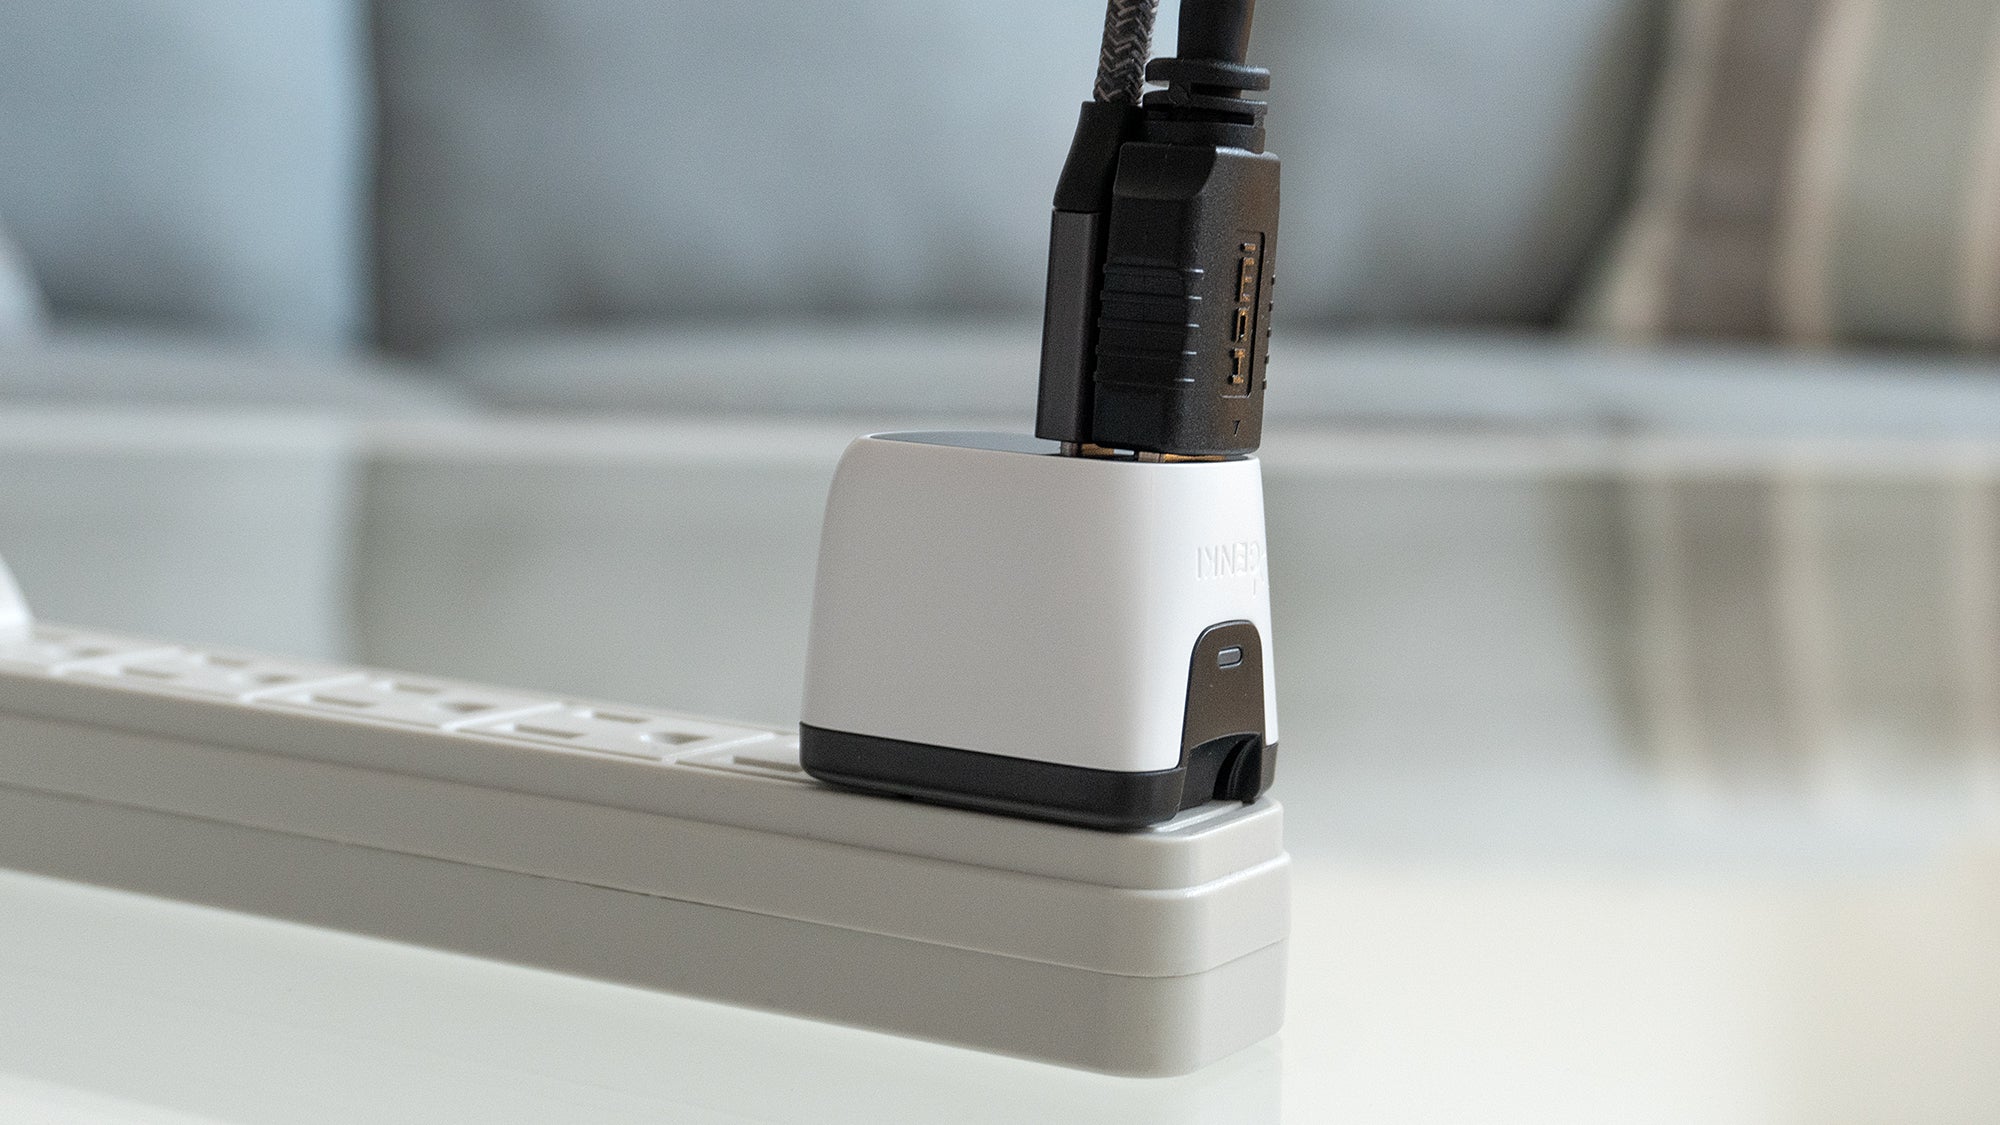 The Covert Dock Mini doesn't replace the need for USB-C and HDMI cables, but at least comes with the former. (Photo: Andrew Liszewski | Gizmodo)